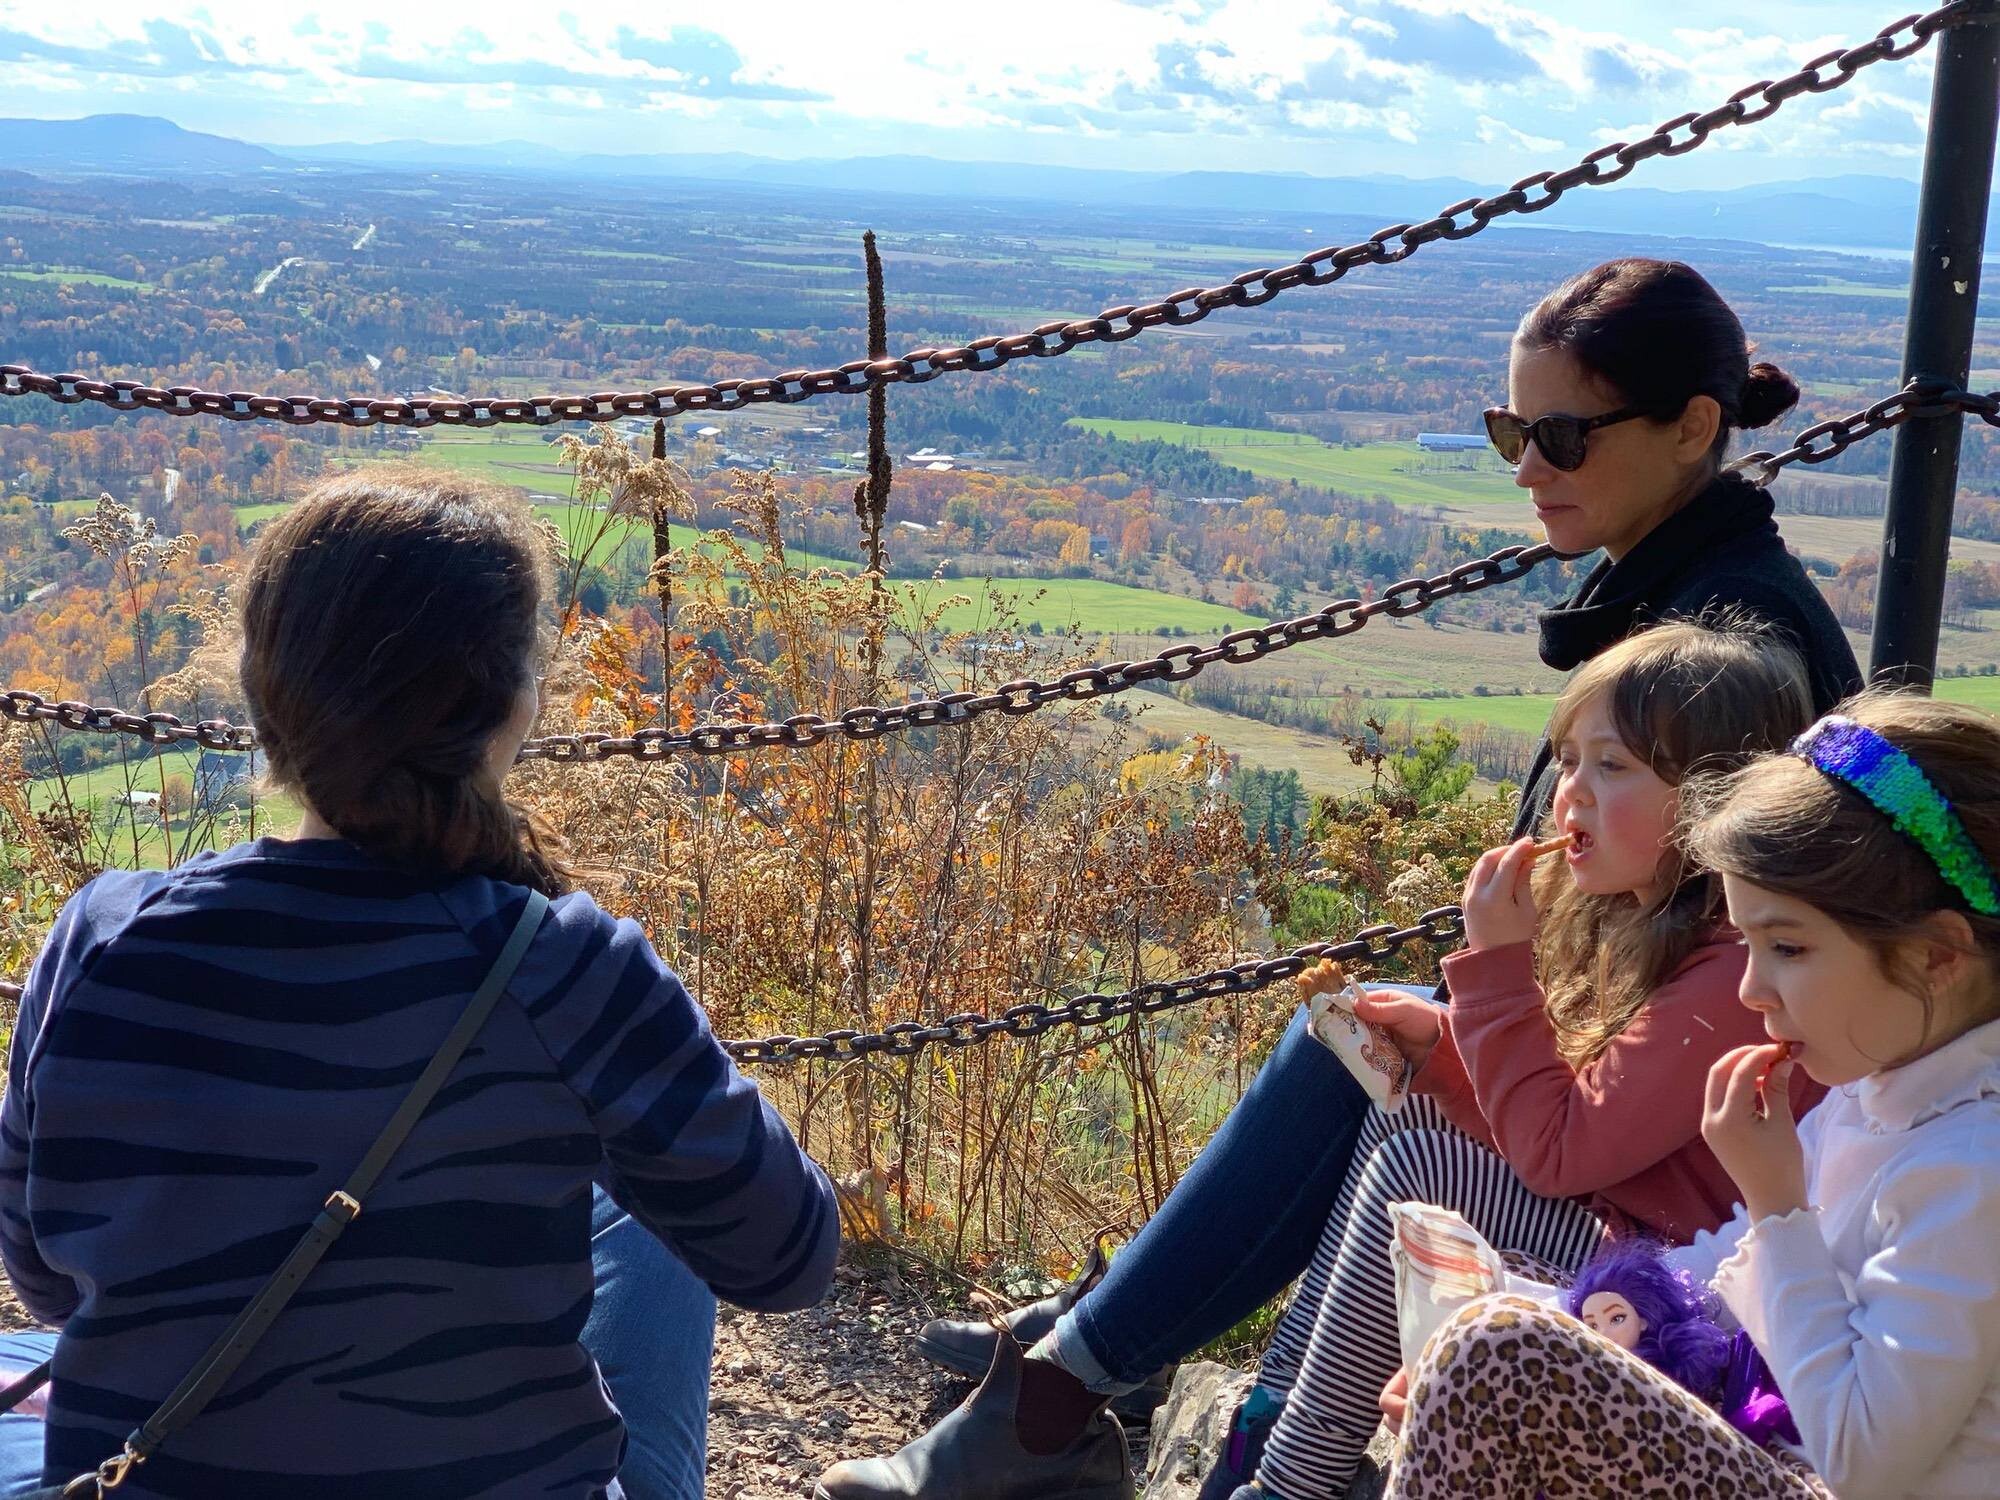 Moms sitting with two young girls overlooking Vermont foliage scene